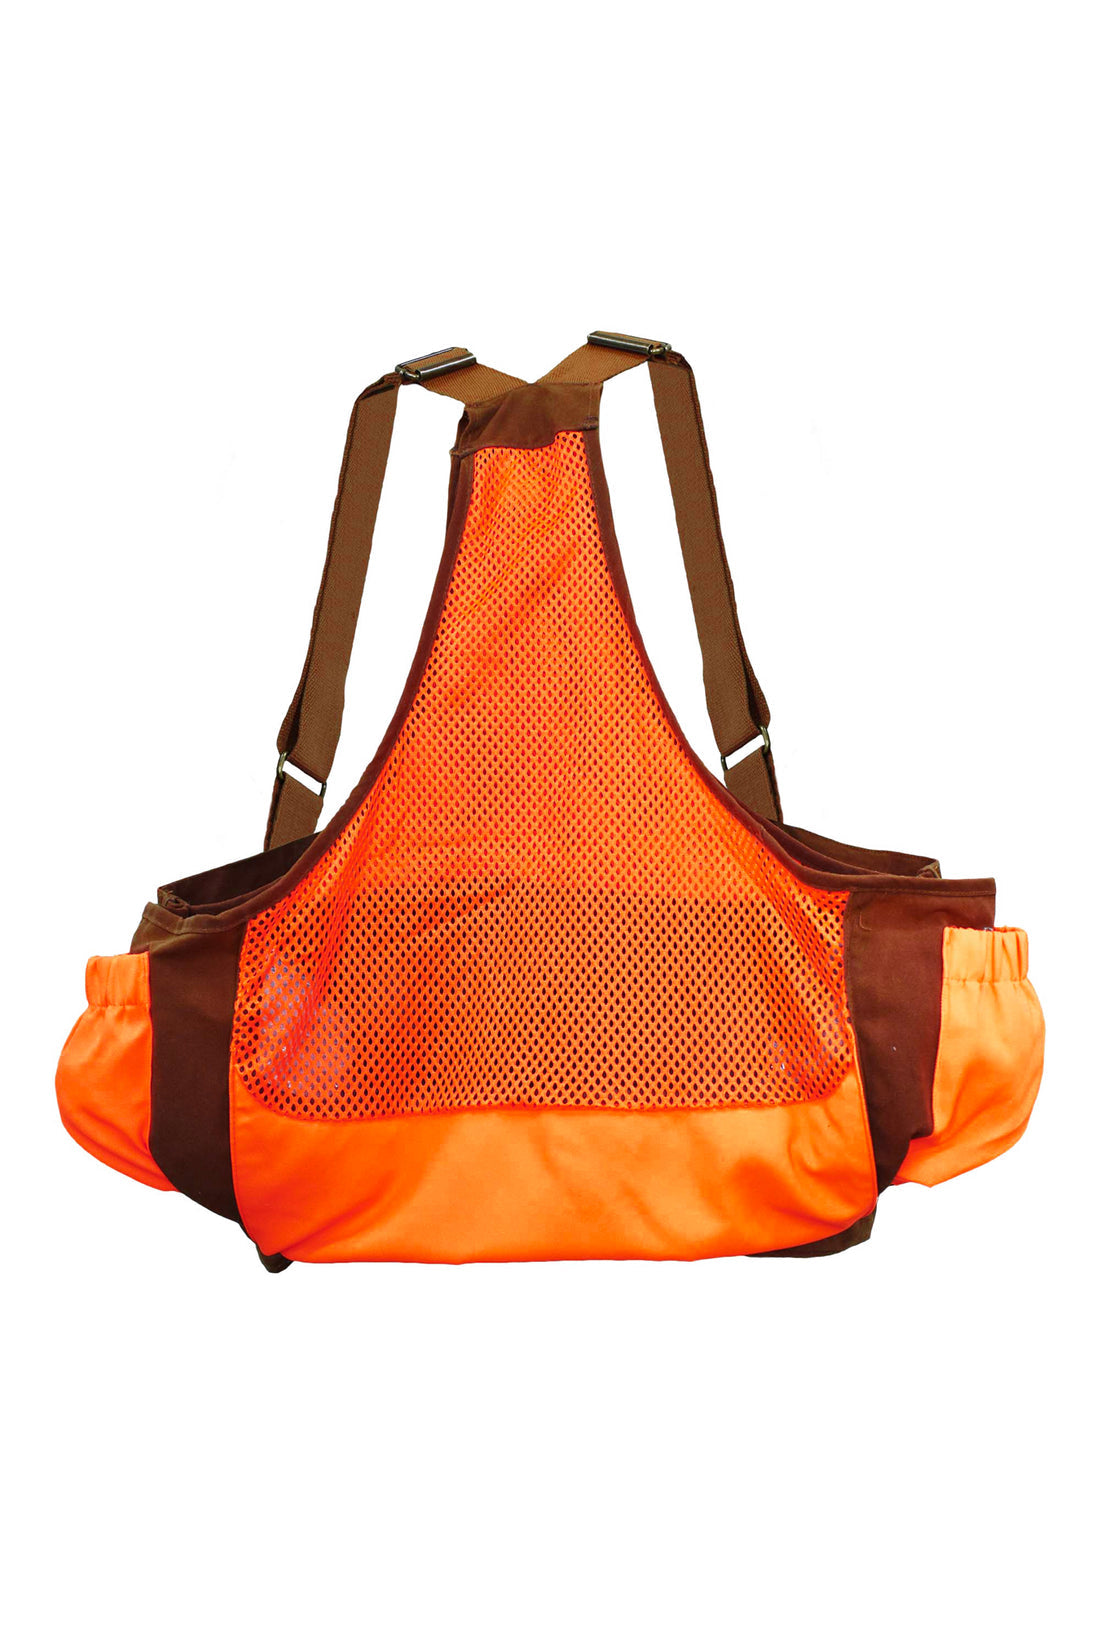 Boyt- Waxed Cotton Strap Vest with Mesh Back